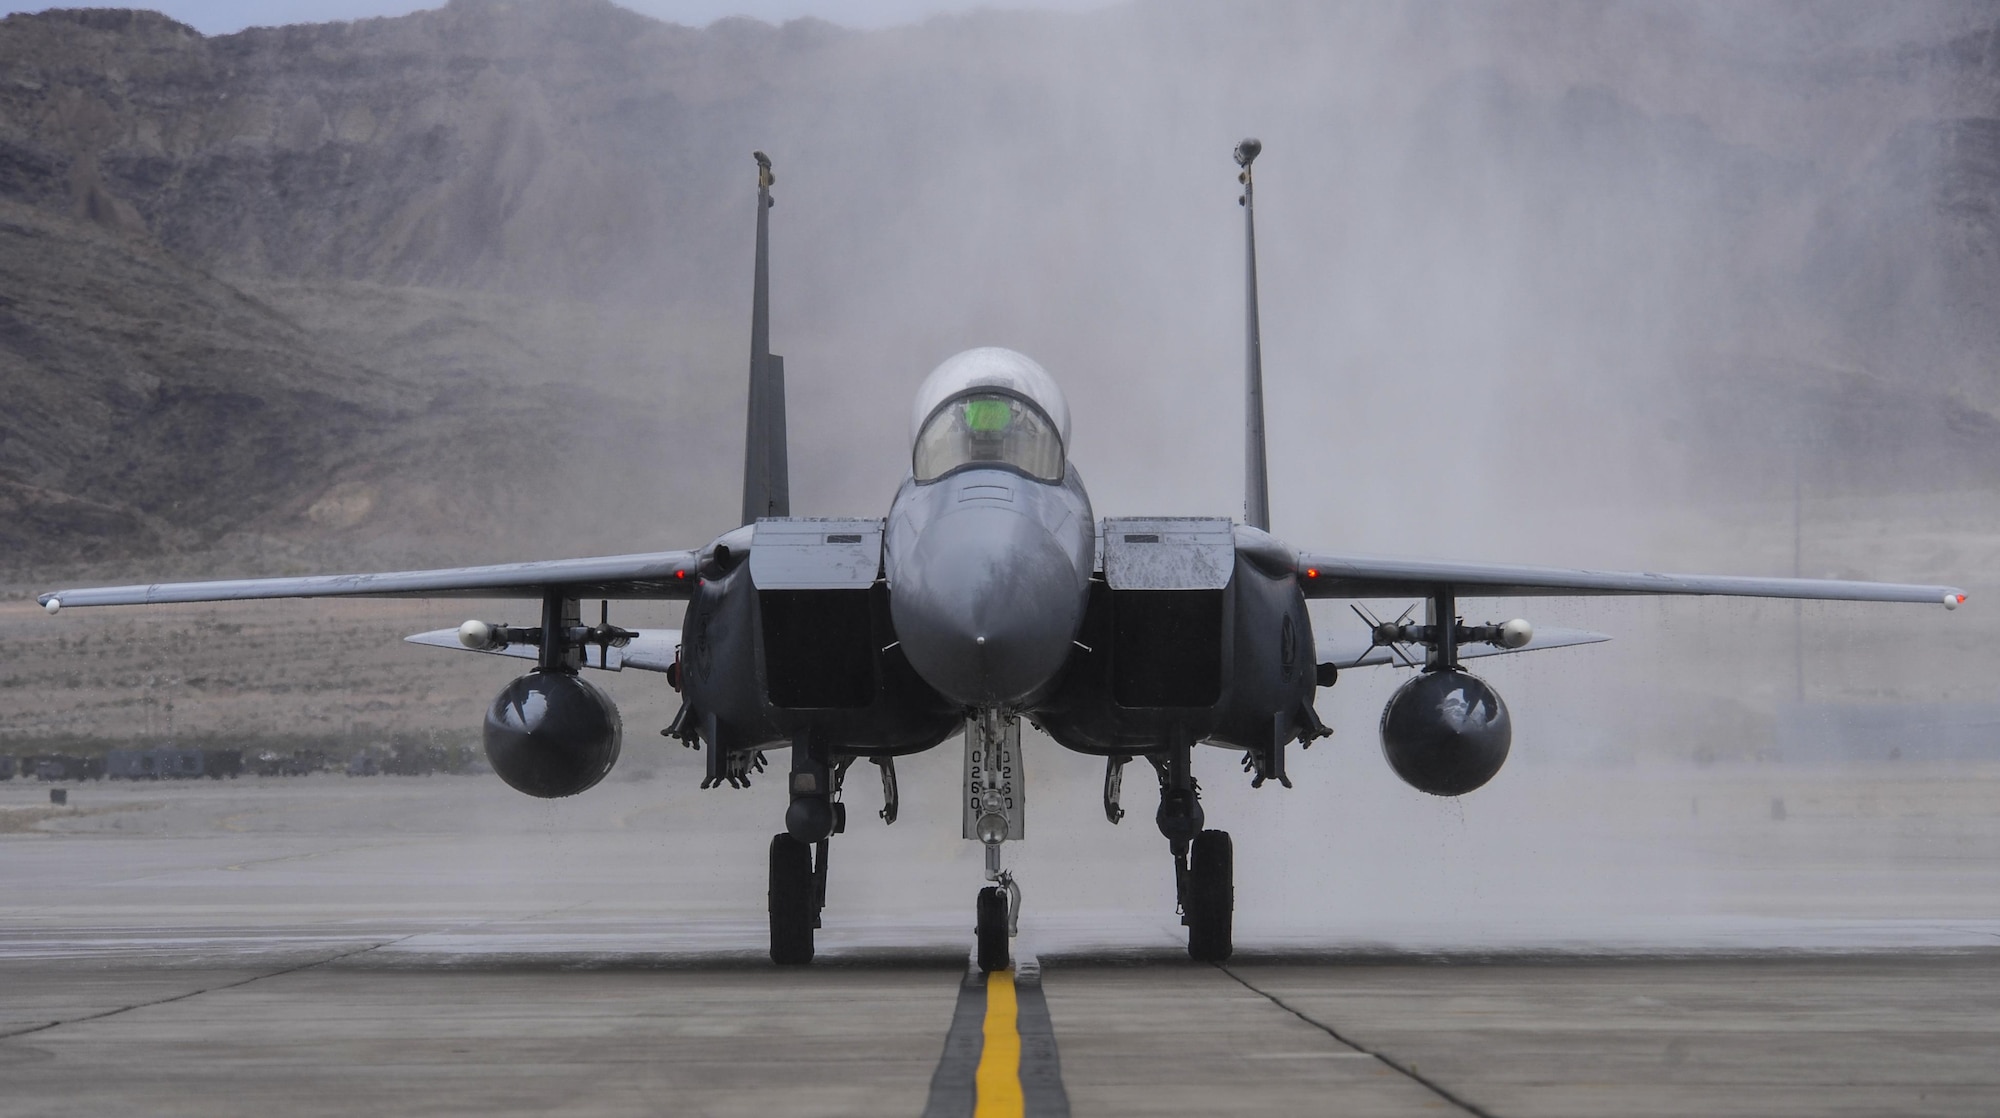 Brig. Gen. Christopher Short, 57th Wing commander, taxis down the runway in an F-16 Fighting Falcon after being sprayed by fire trucks during his fini flight at Nellis Air Force Base, Nev., April 8, 2016. A fini flight is a pilot’s last flight in an aircraft before he/she leaves a squadron, a wing, or retires from the Air Force. (U.S. Air Force photo by Airman 1st Class Kevin Tanenbaum)